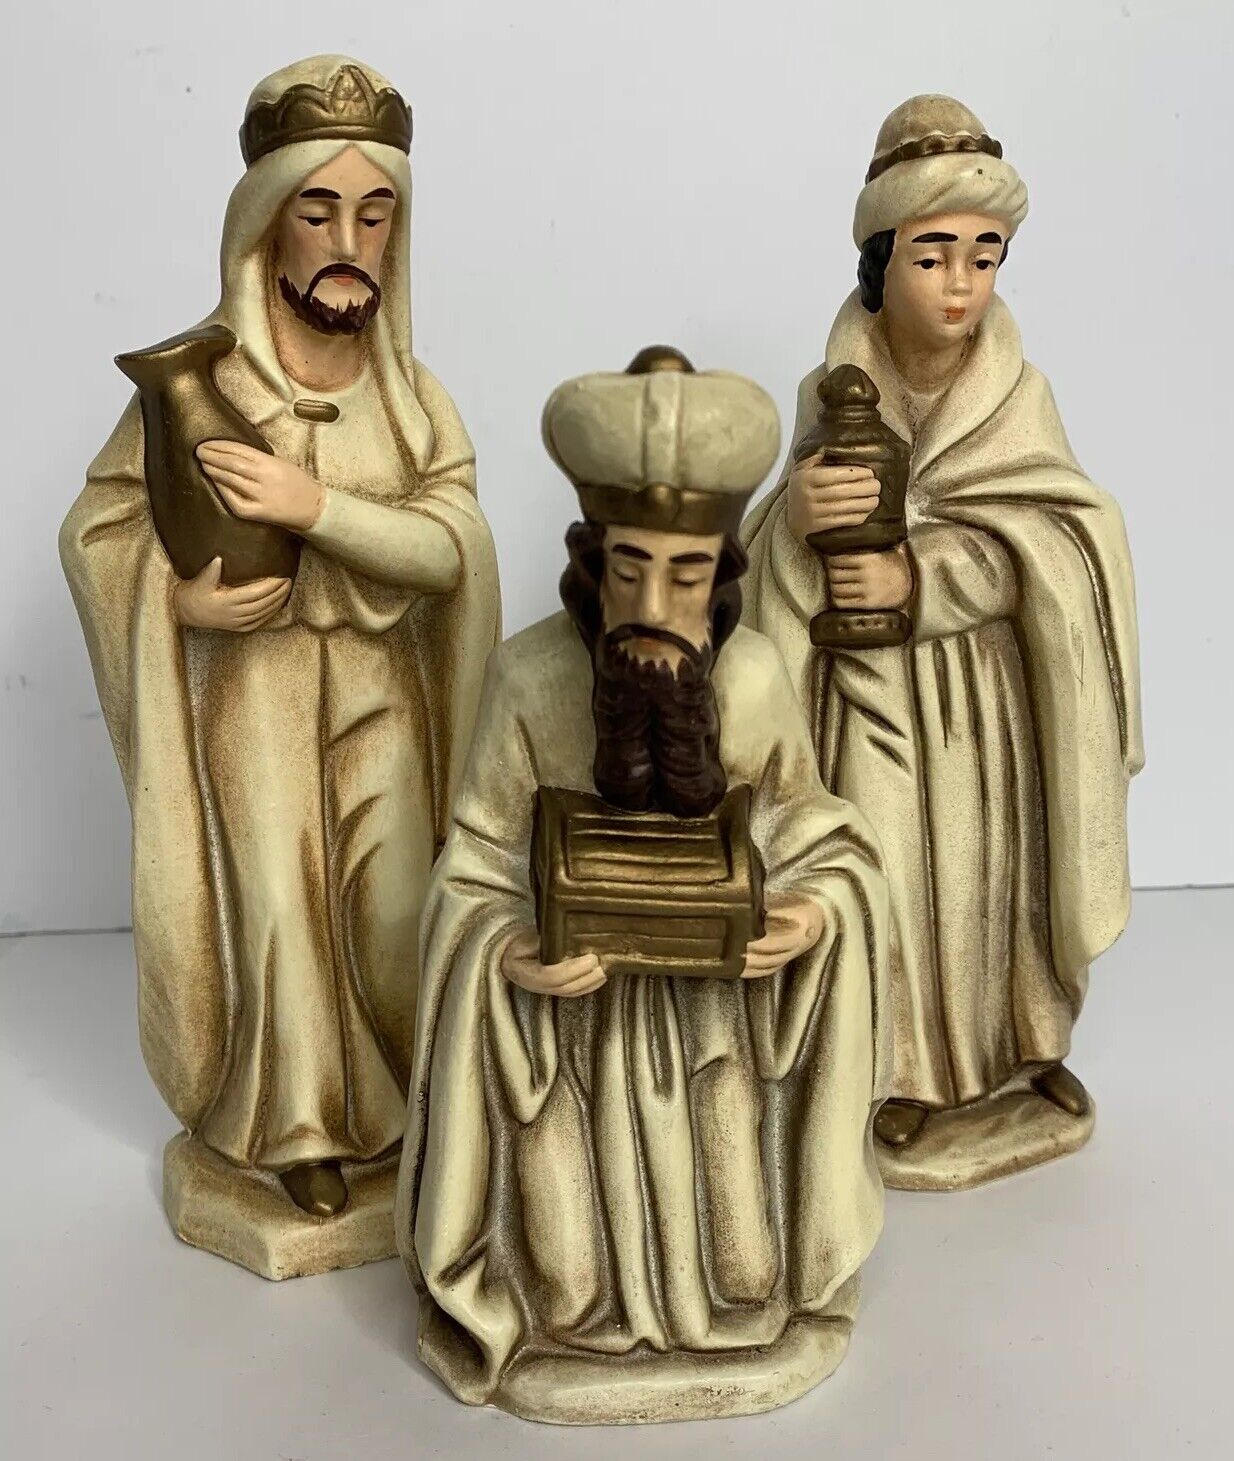 Vintage Three Wise Men Figurines Statues Made in Korea  Set of 3 Nativity